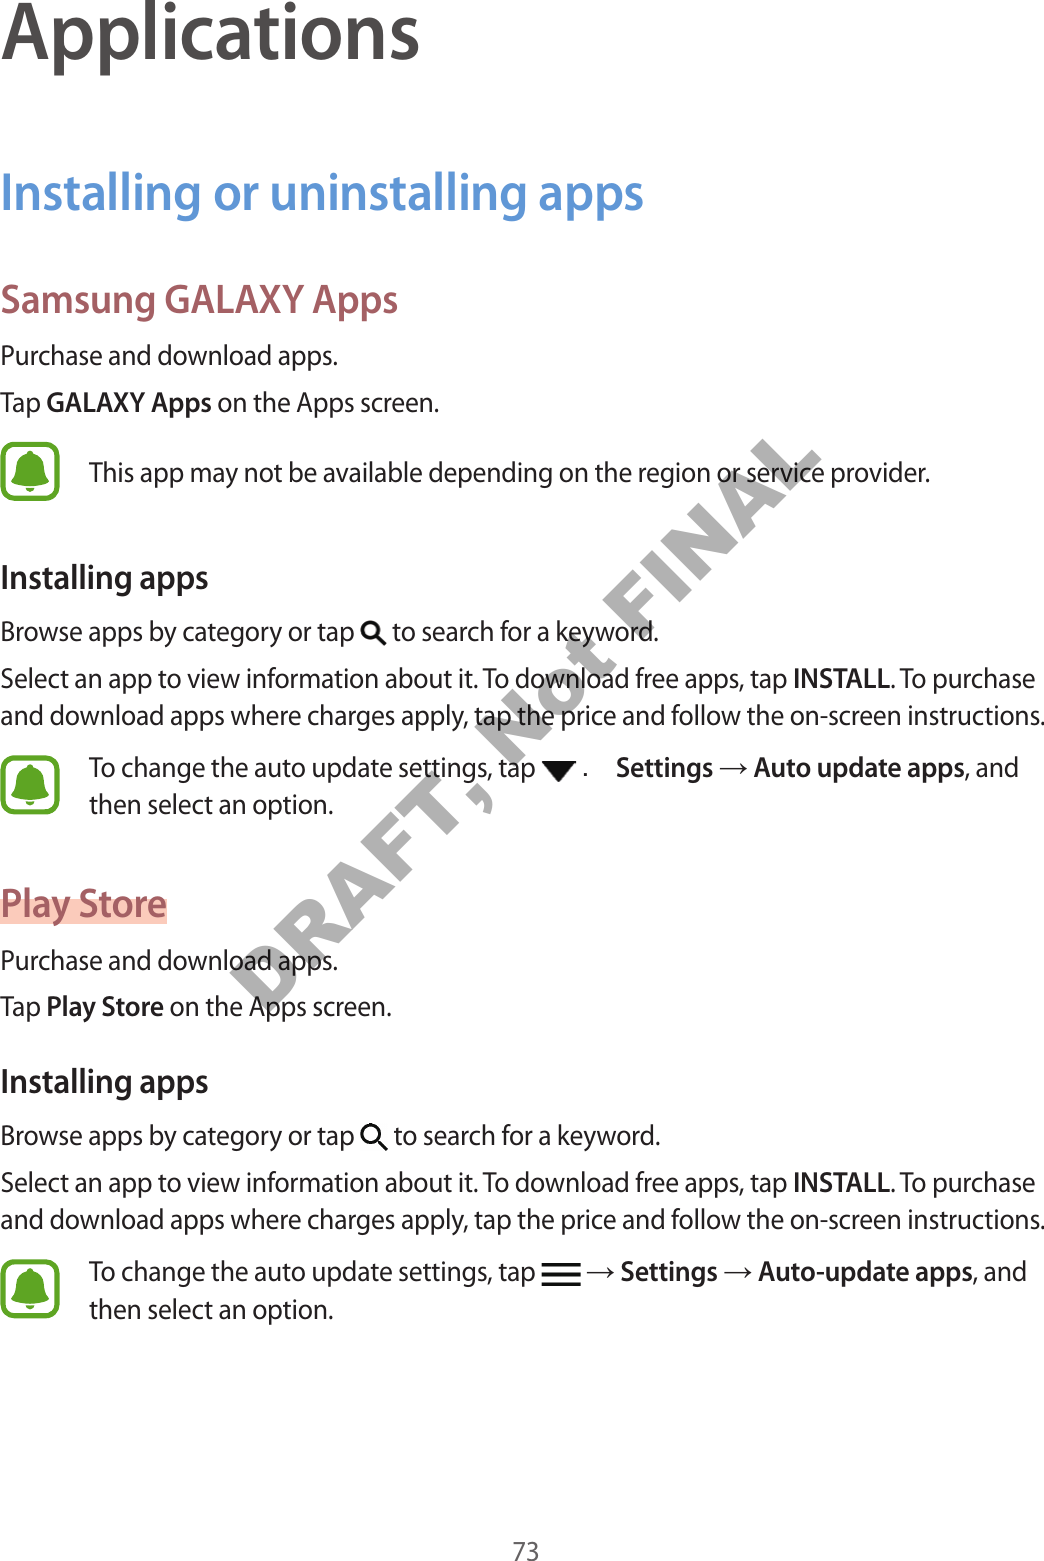 73ApplicationsInstalling or uninstalling appsSamsung GALAXY AppsPurchase and download apps.Tap GALAXY Apps on the Apps screen.This app may not be available depending on the region or service provider.Installing appsBrowse apps by category or tap   to search for a keyword.Select an app to view information about it. To download free apps, tap INSTALL. To purchase and download apps where charges apply, tap the price and follow the on-screen instructions.To change the auto update settings, tap   . Settings ĺ Auto update apps, and then select an option.Play StorePurchase and download apps.Tap Play Store on the Apps screen.Installing appsBrowse apps by category or tap   to search for a keyword.Select an app to view information about it. To download free apps, tap INSTALL. To purchase and download apps where charges apply, tap the price and follow the on-screen instructions.To change the auto update settings, tap   ĺ Settings ĺ Auto-update apps, and then select an option.DRAFT, Not FINAL